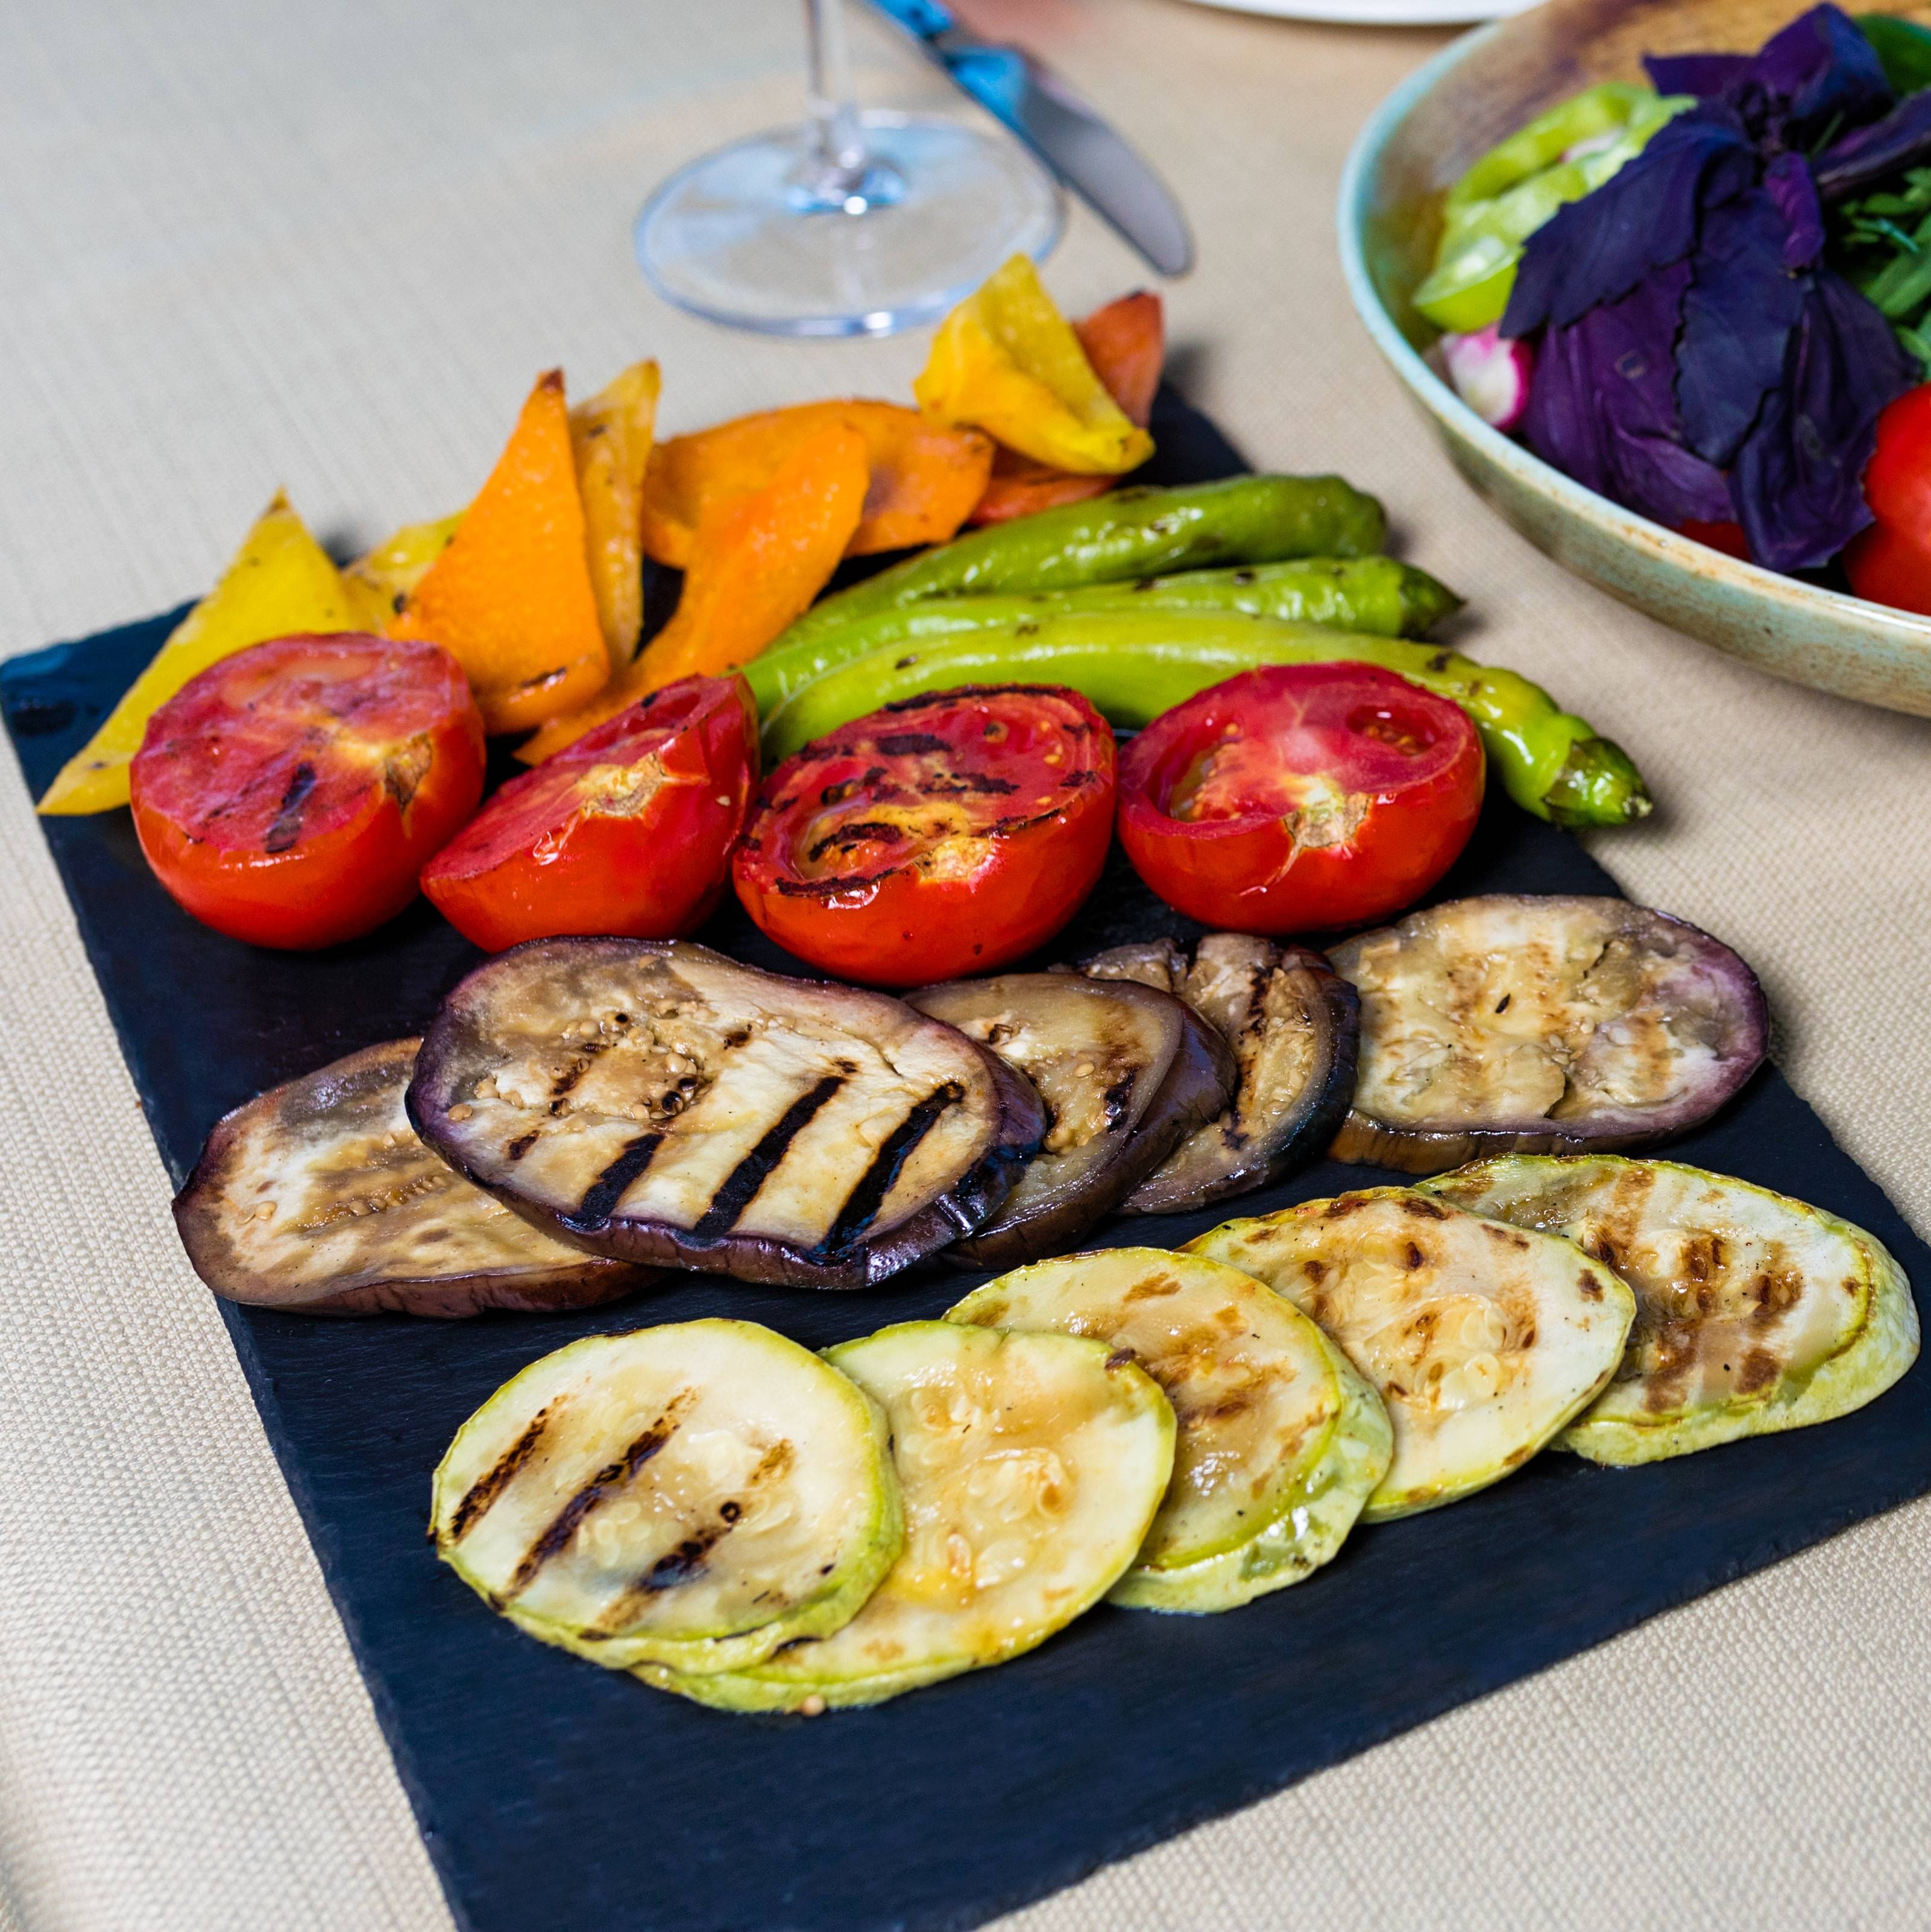 How To: Vegan-Friendly Grilling Techniques